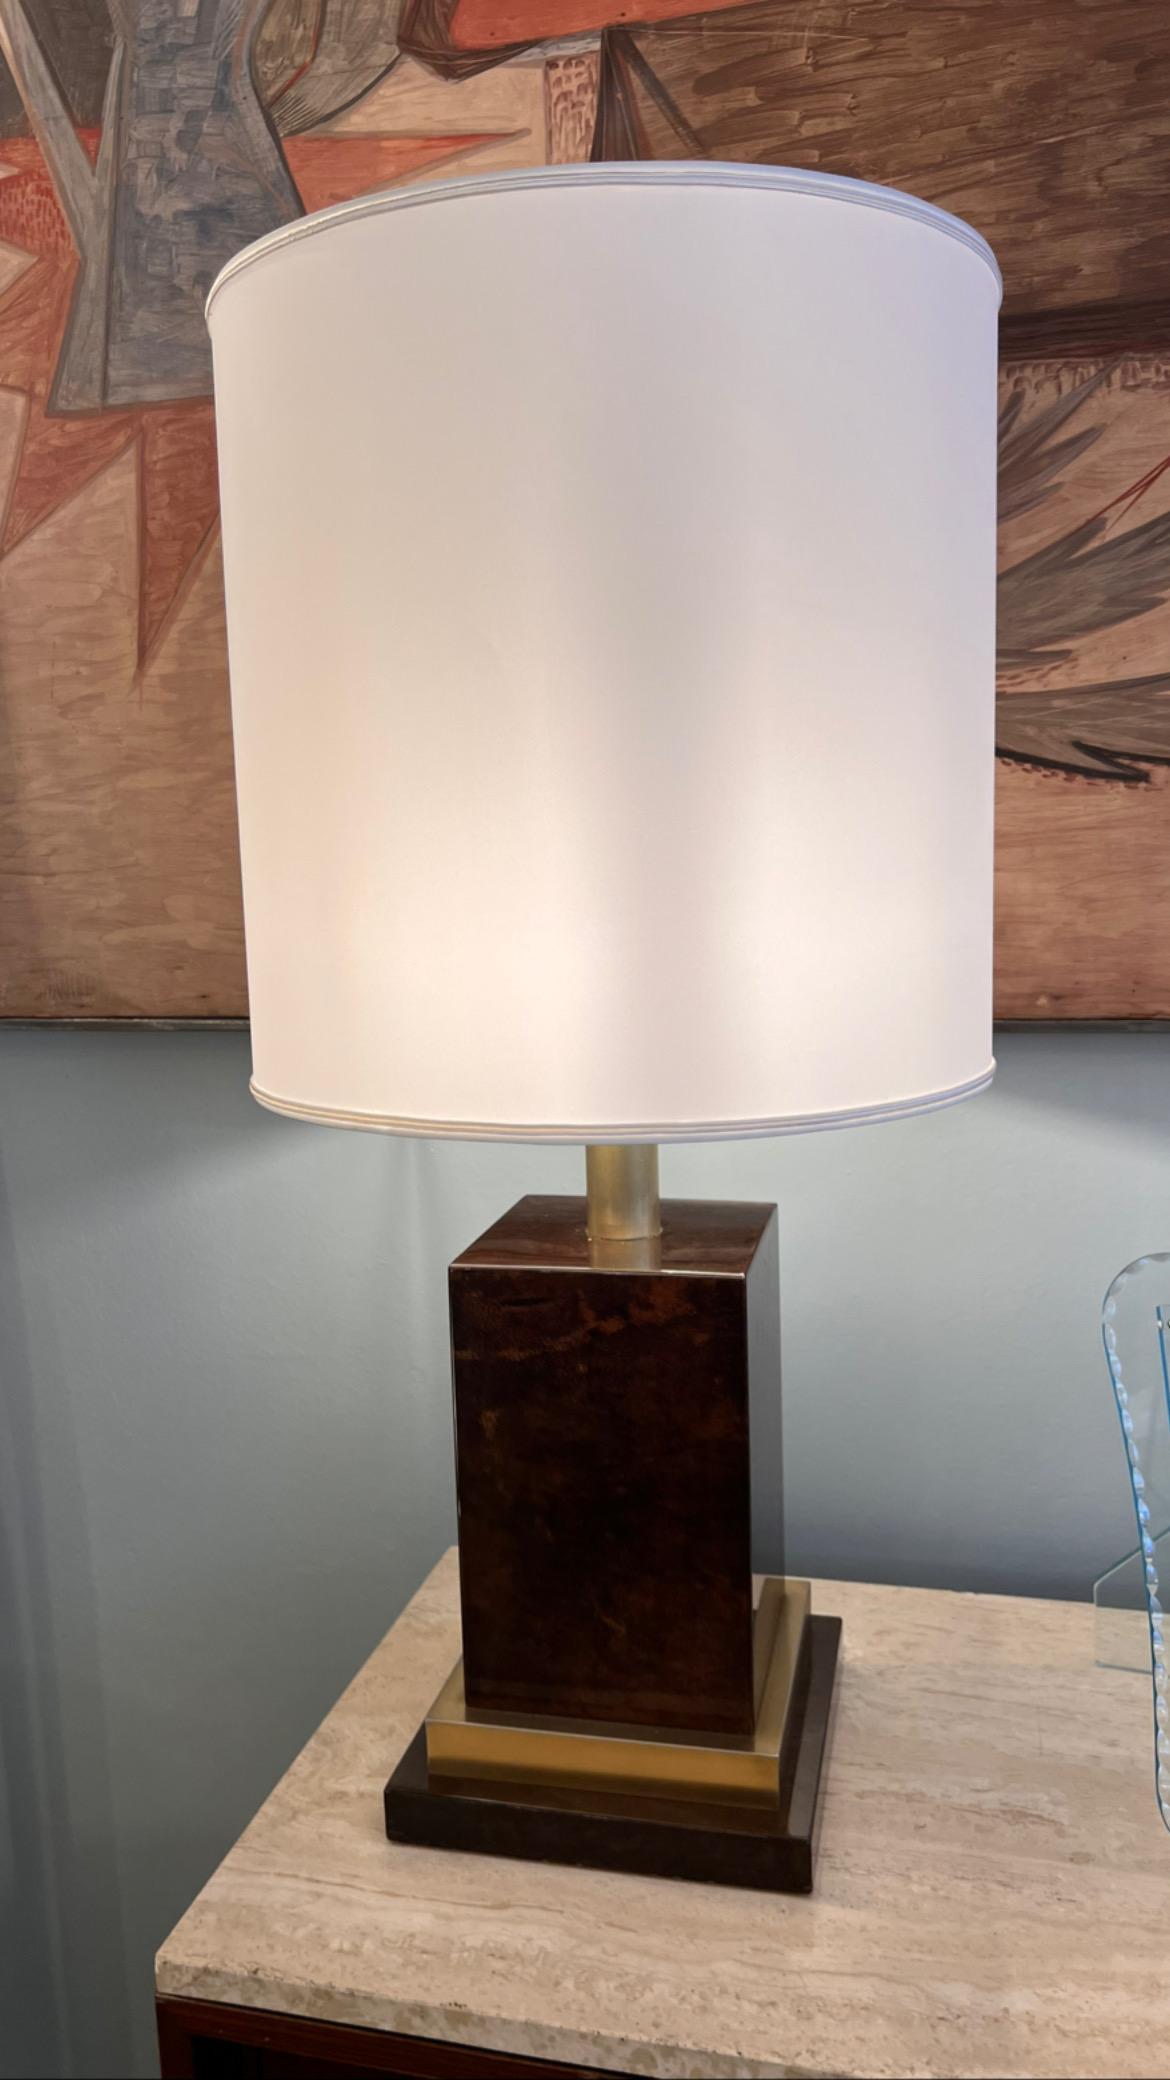 GLAZED PARCHMENT AND BRASS LAMP WITH WHITE SHADE - 1970s - from a Italy - Aldo Tura style. Size base 23 cm x 23 cm x H. 32 cm - with shade H. 80 cm 
Wiring working system.
Great conditions. No restoration. 
Better pictures and video to come.